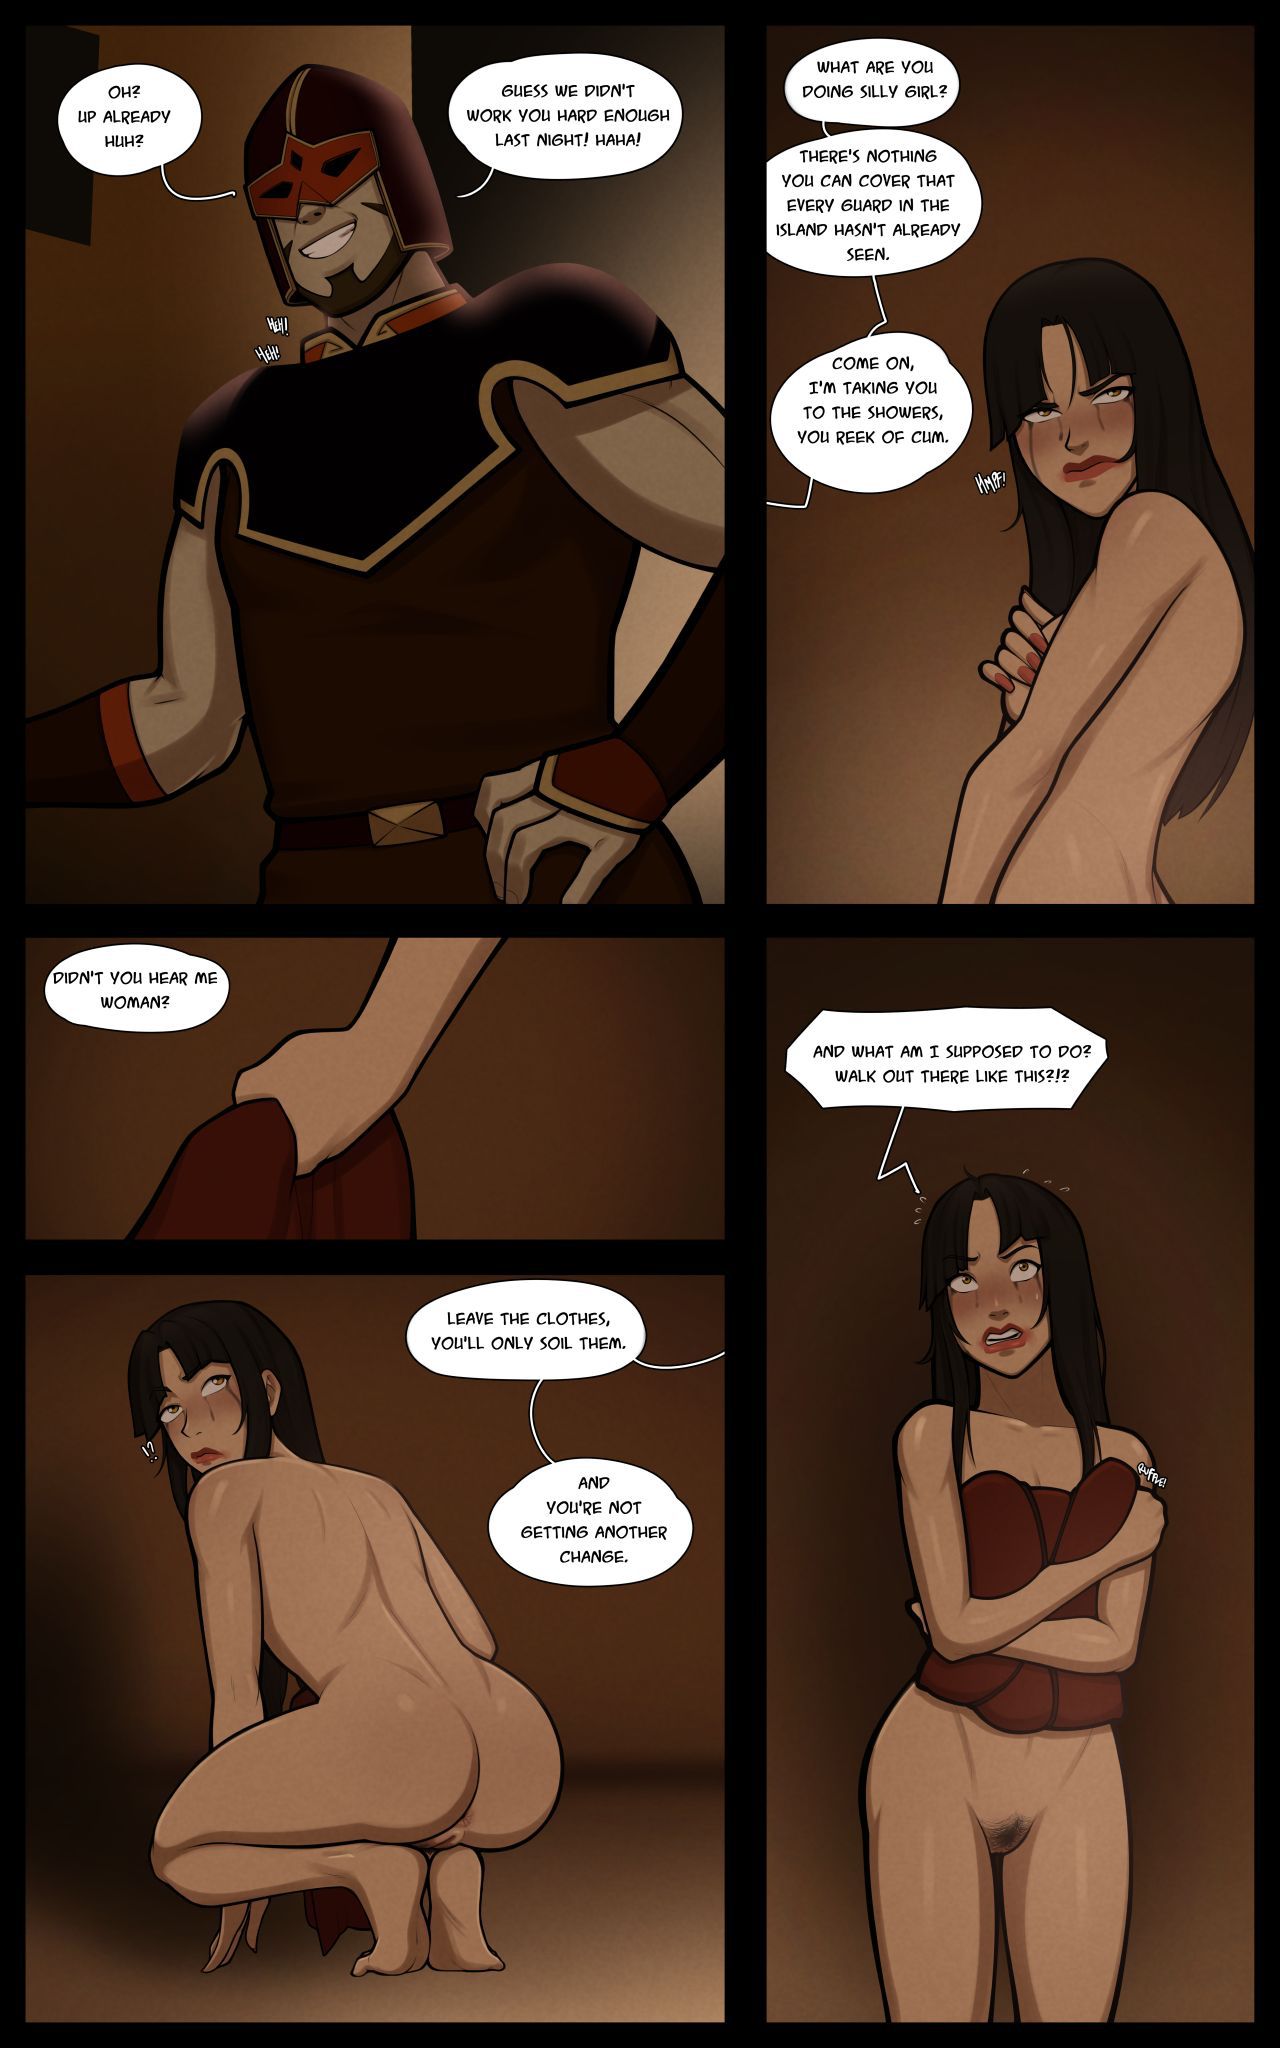 [MrPotatoParty] Azula - The Boiling Rock (Avatar: The Last Airbender) [Ongoing] 24